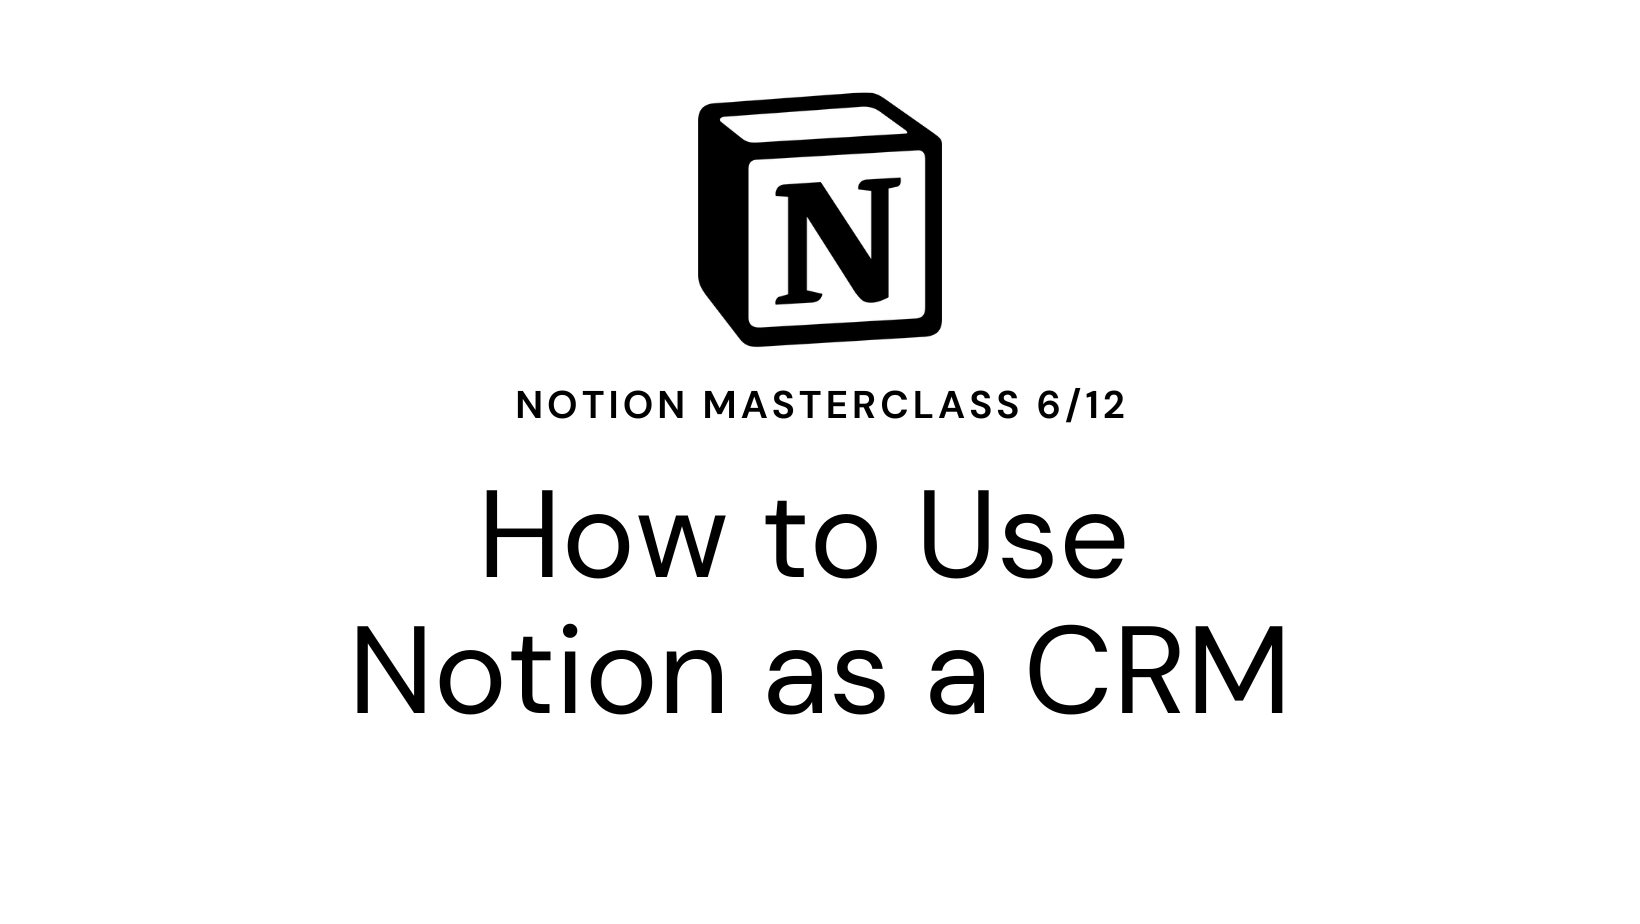 How to Use Notion as a CRM: Tips and Tricks for Managing Your Contacts